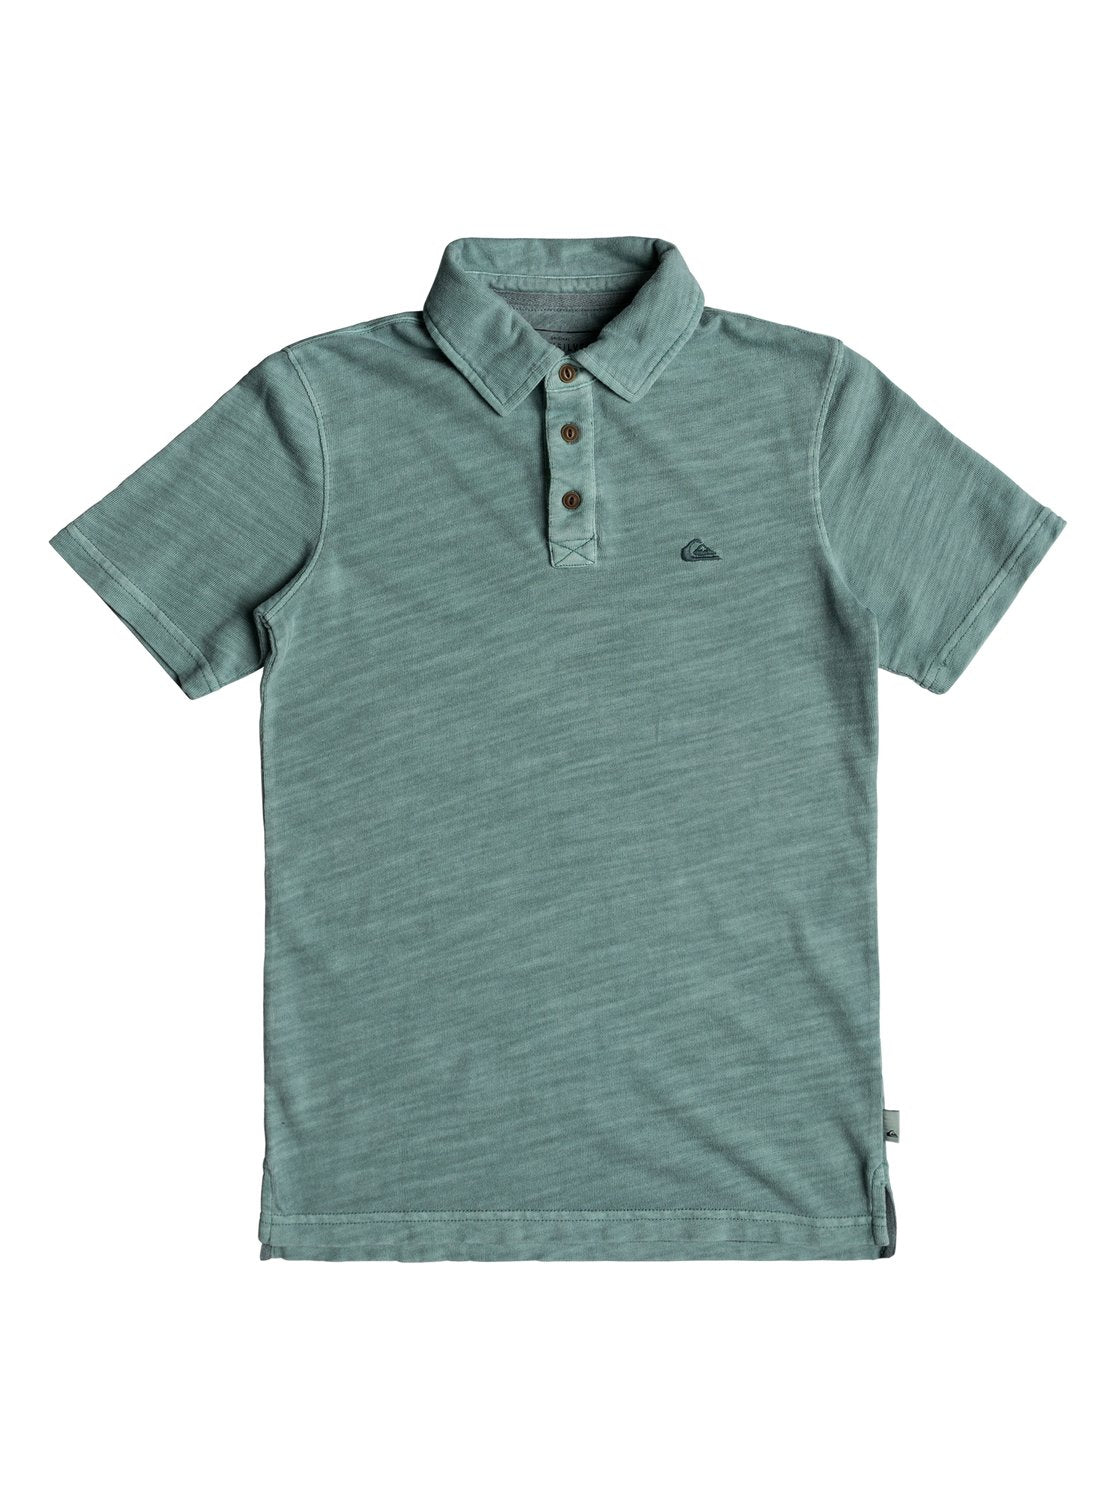 Quiksilver Everyday Sun Cruise Youth Polo BKW0 XL/16